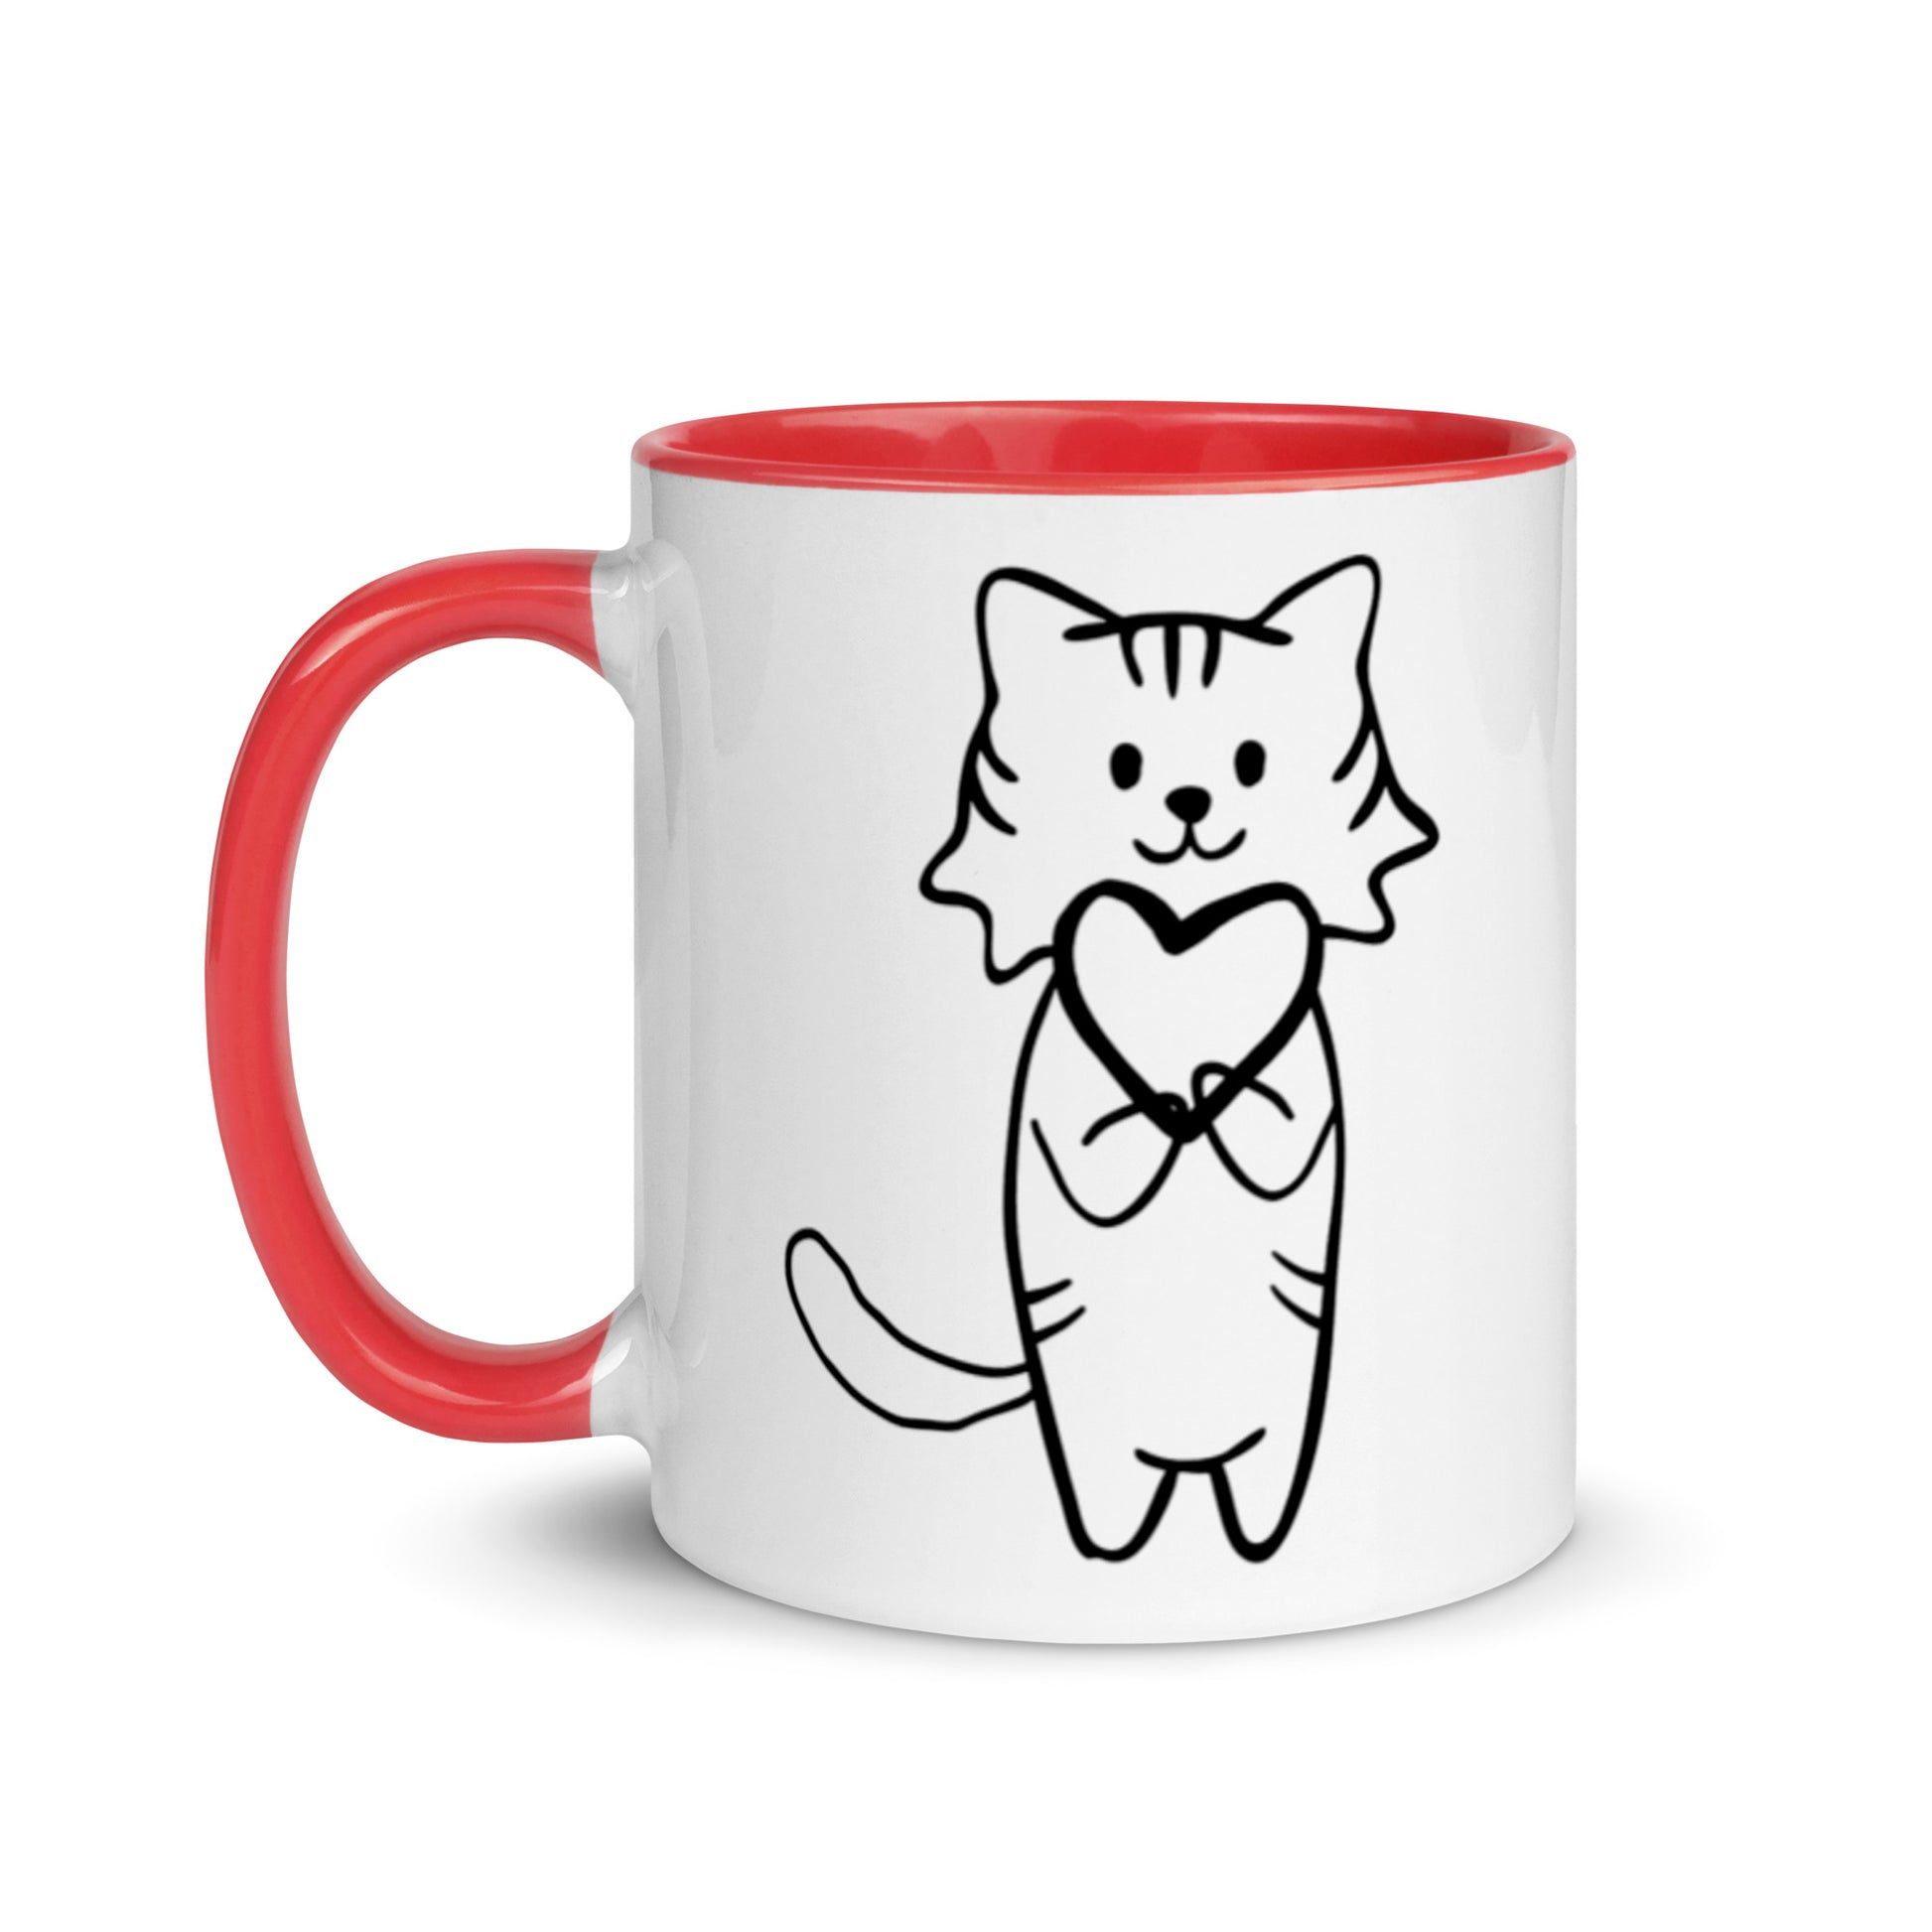 Paw-sitive Vibes Only Mug red with cat